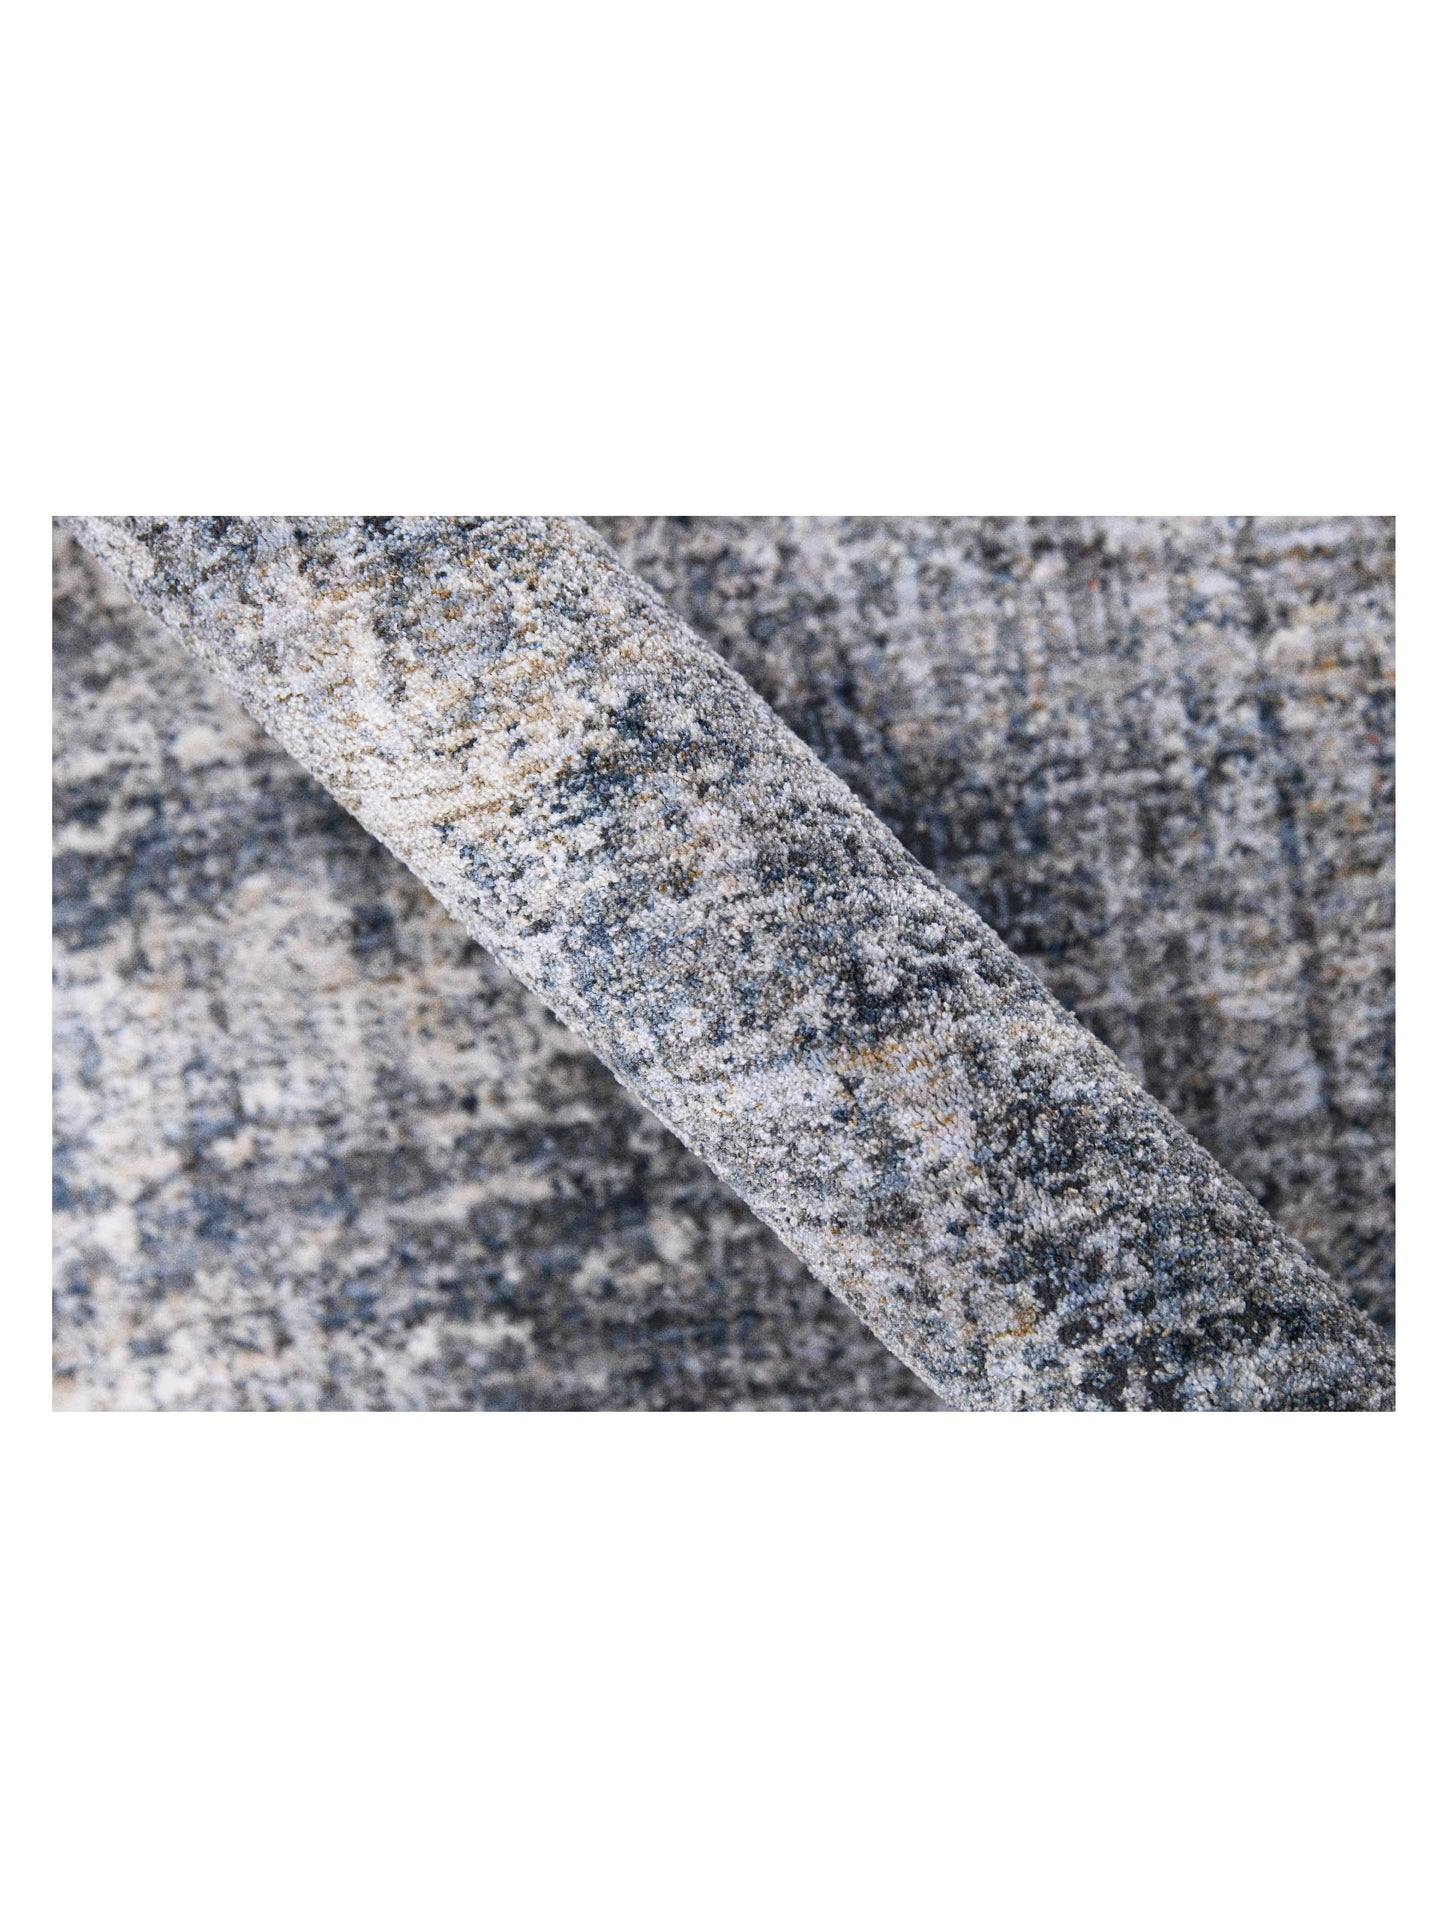 Limited Westonia WES-907 GRAY  Transitional Machinemade Rug